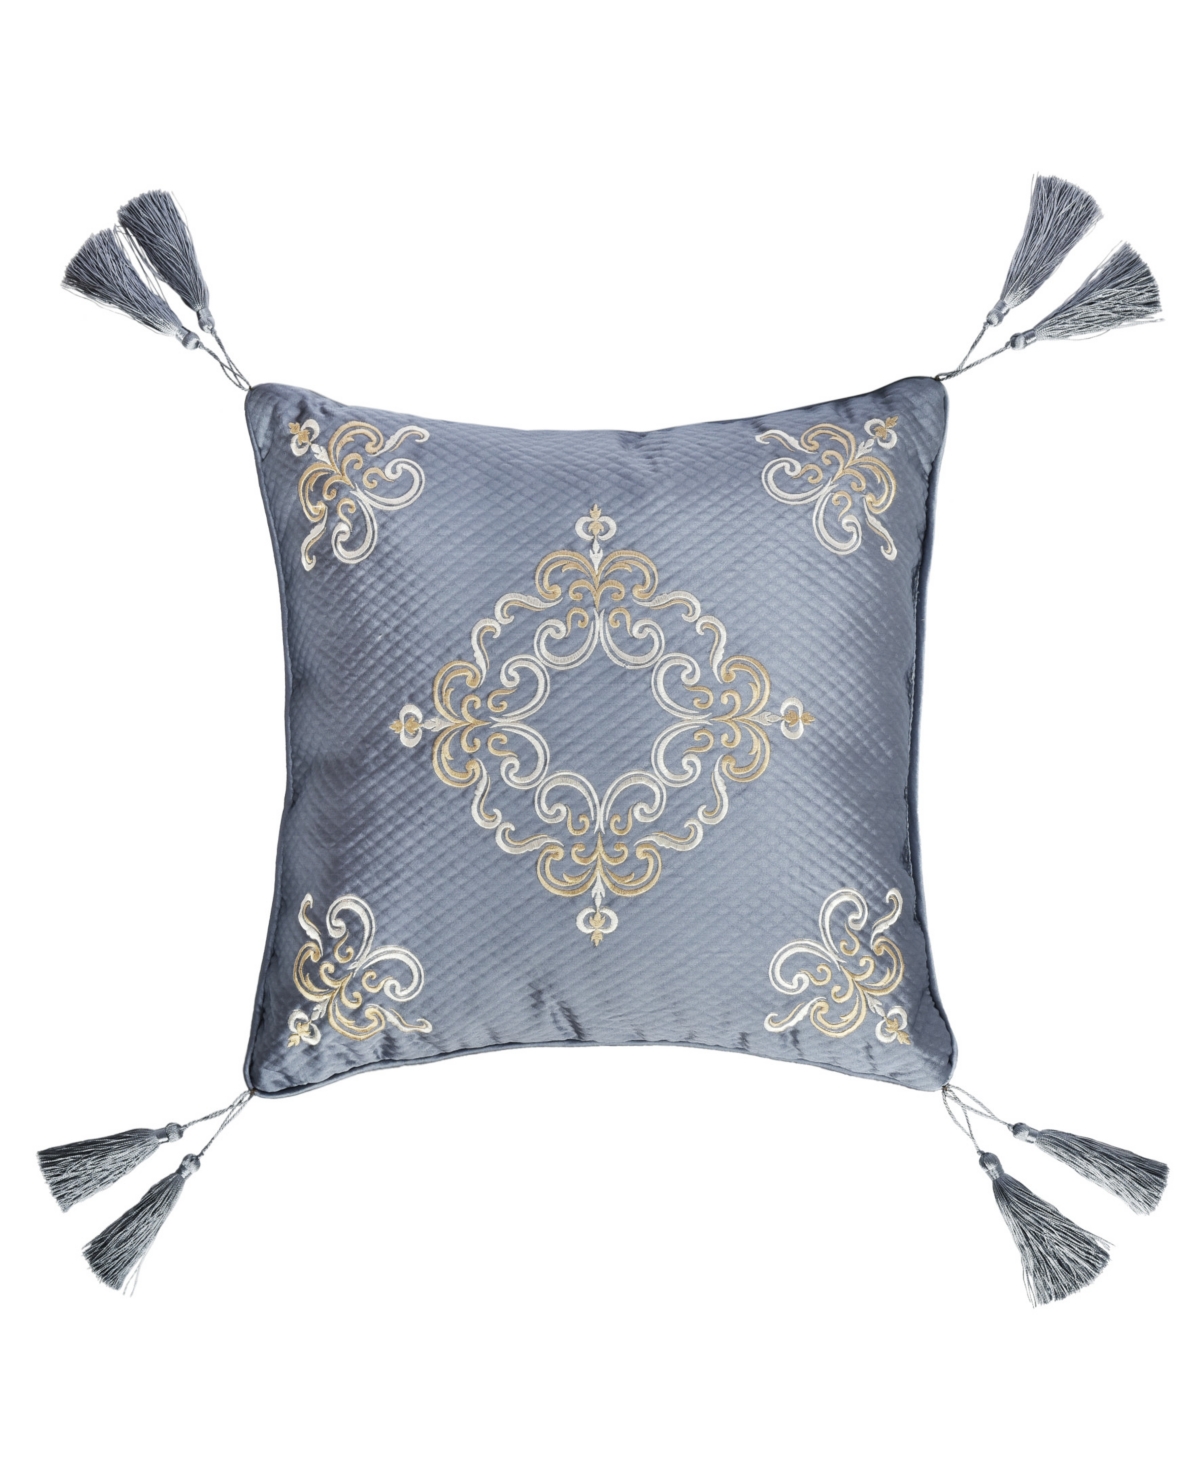 J Queen New York Dicaprio Embellished Decorative Pillow, 18" X 18" In Powder Blue